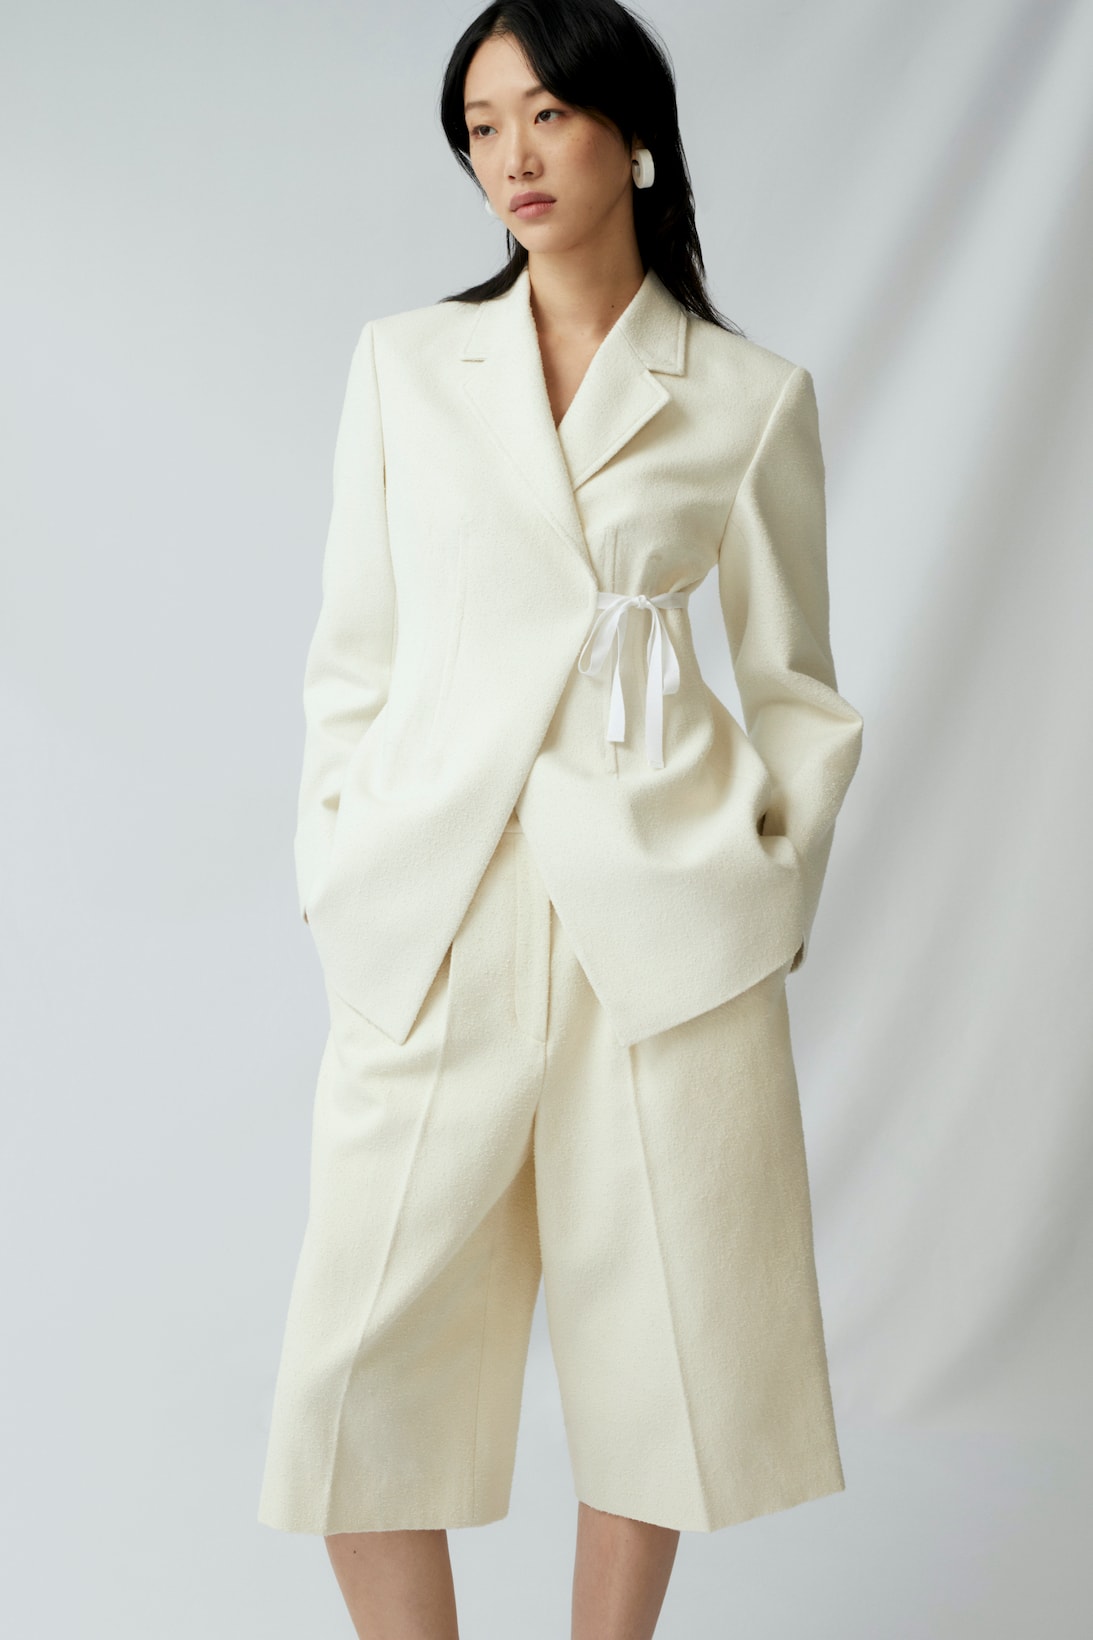 sora choi cos spring womenswear summer collection lookbook white jacket pants outerwear earrings jewelry